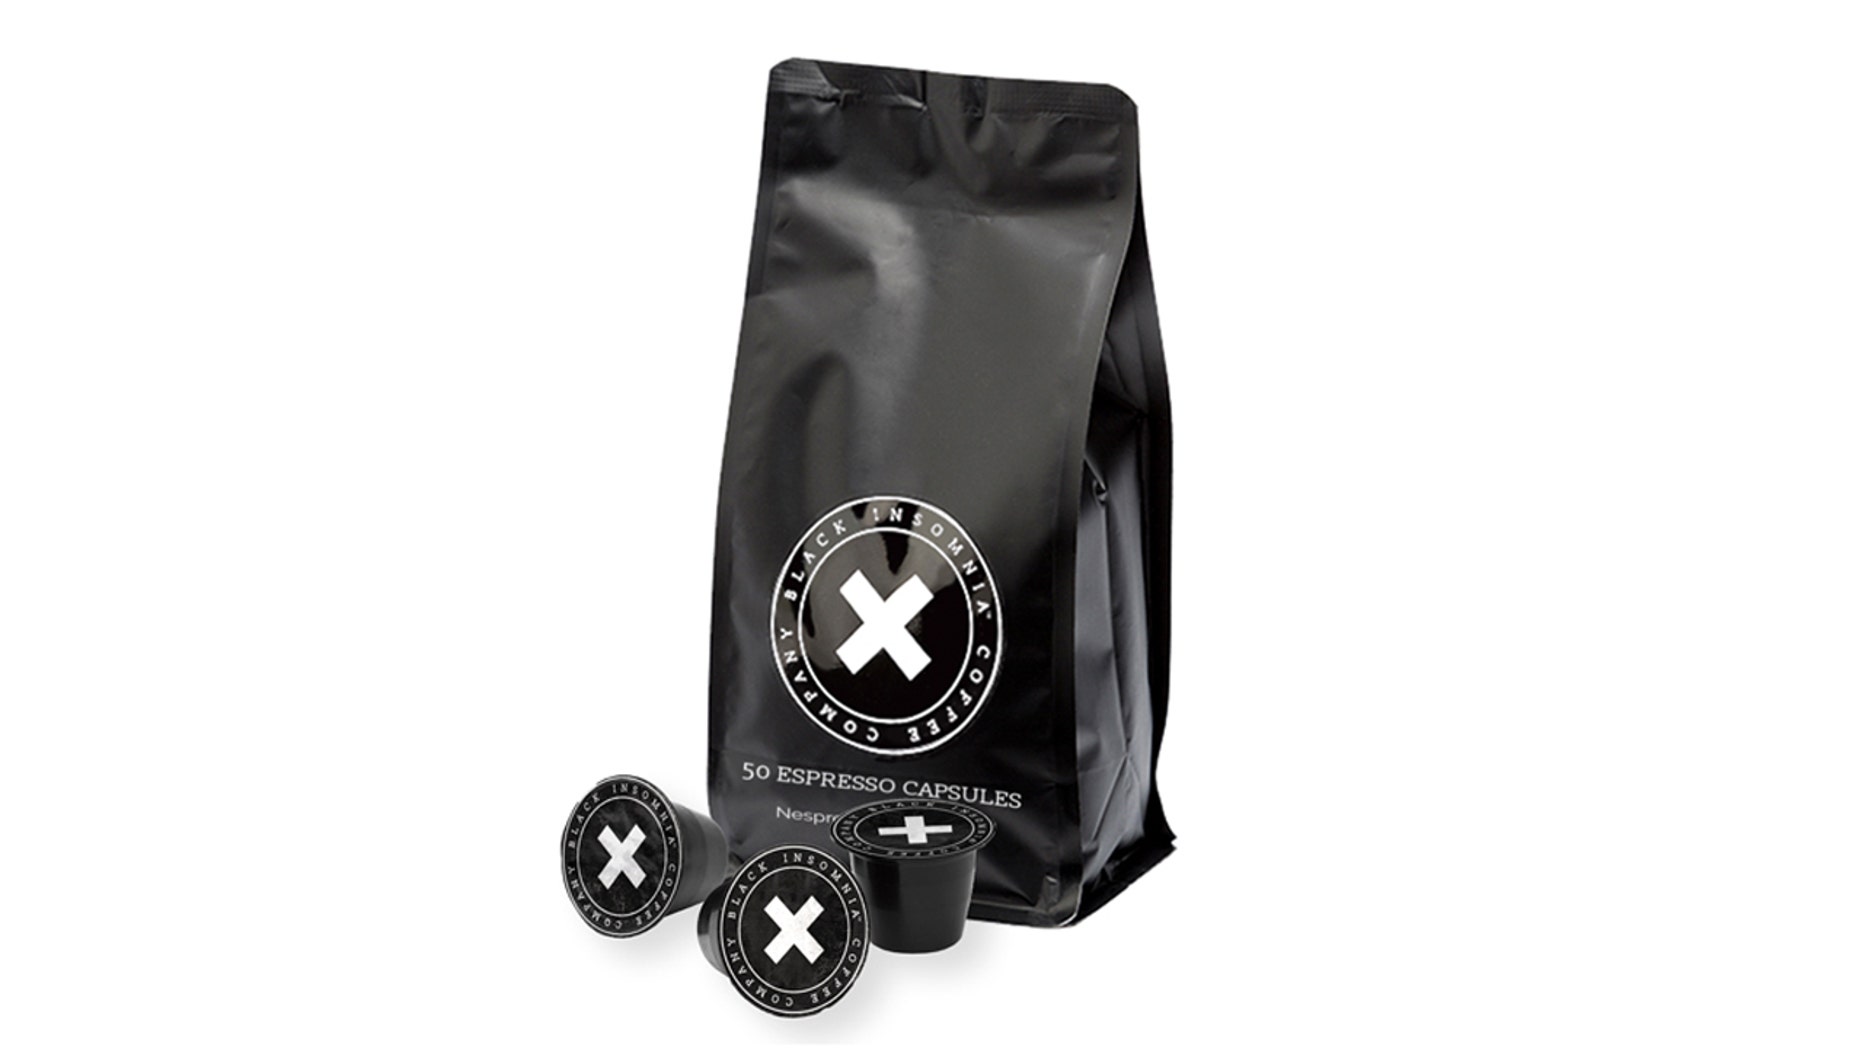 black insomnia coffee review